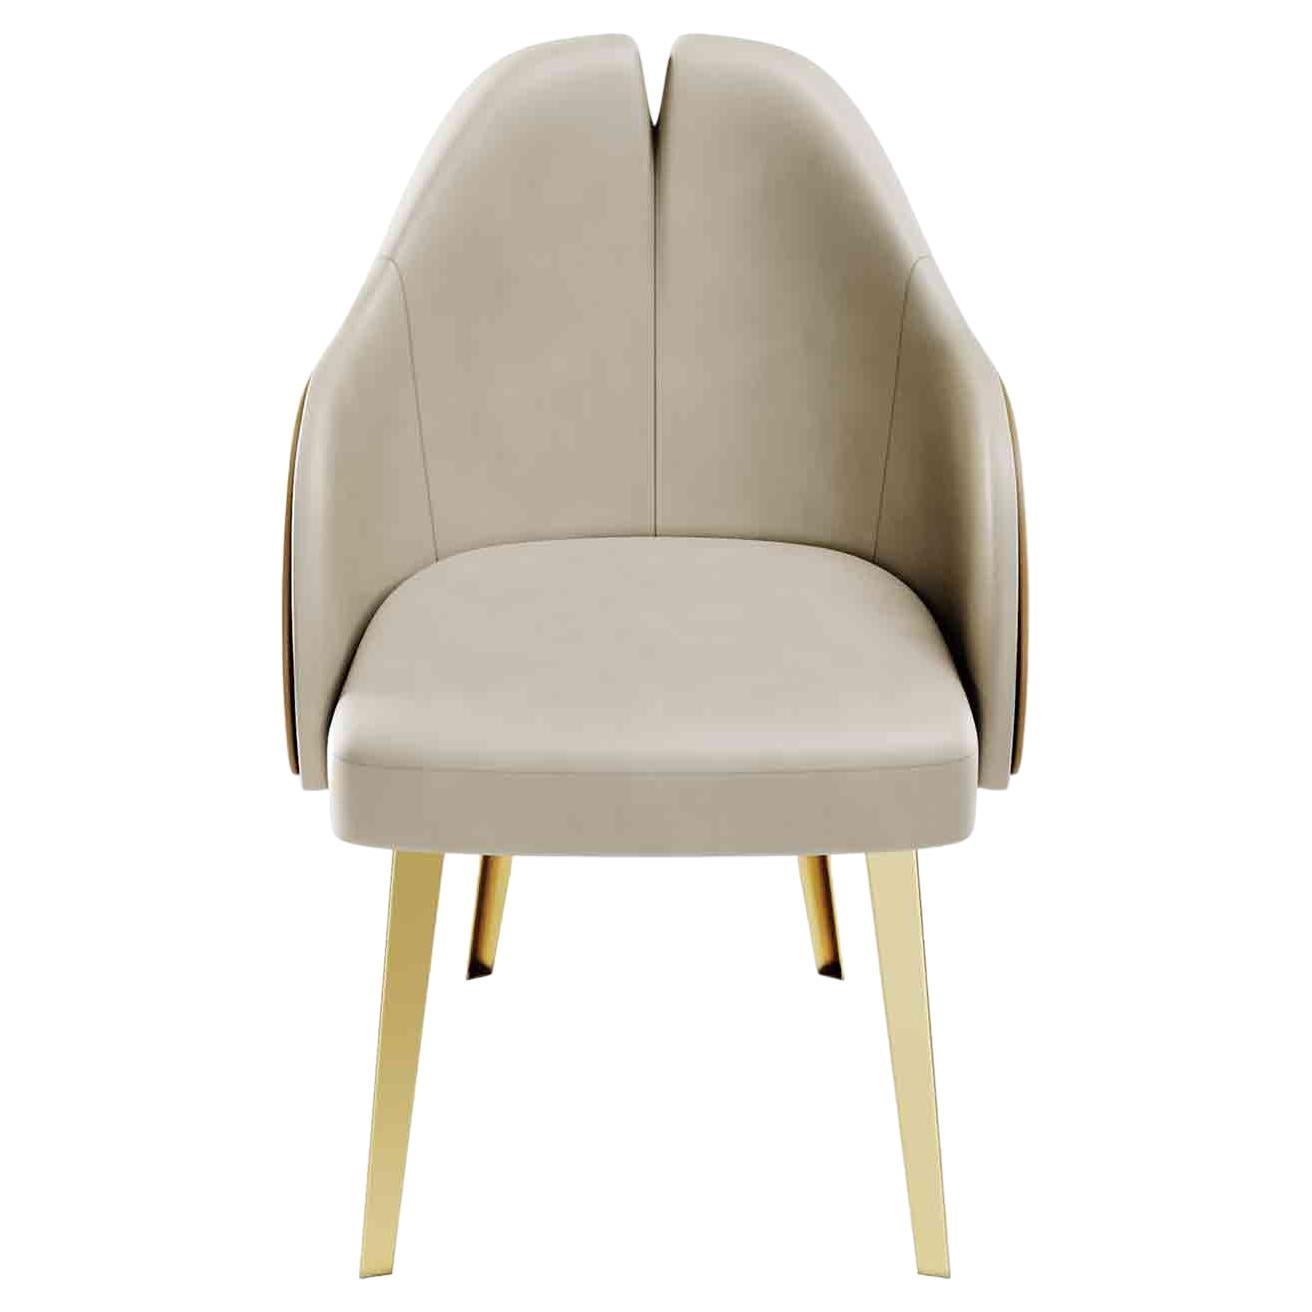 Modern Classic Dining Room Chair in Leather & Polished Golden Brass Details